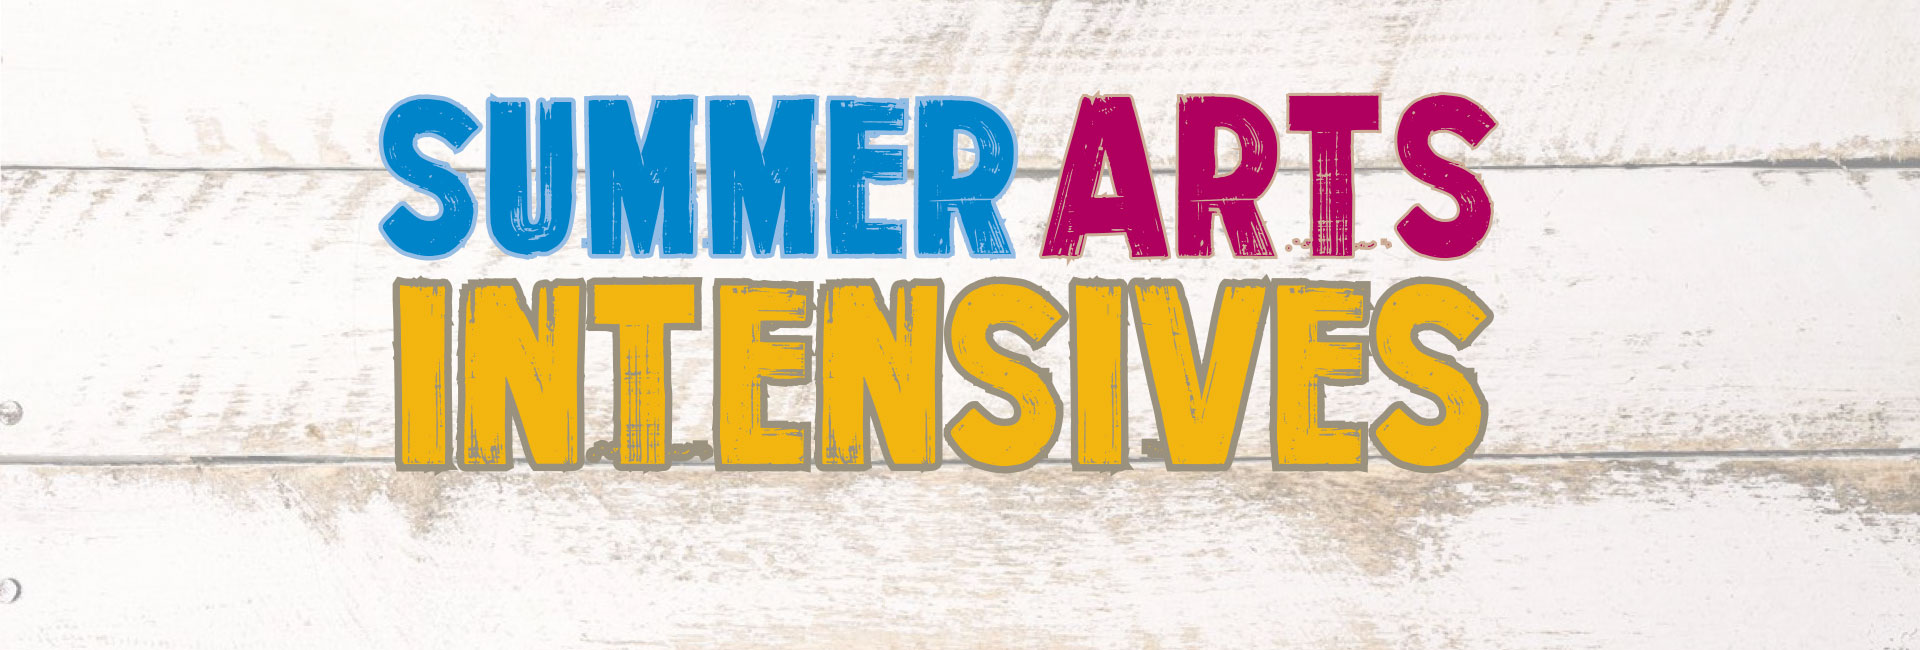 summer arts intensive on white fence